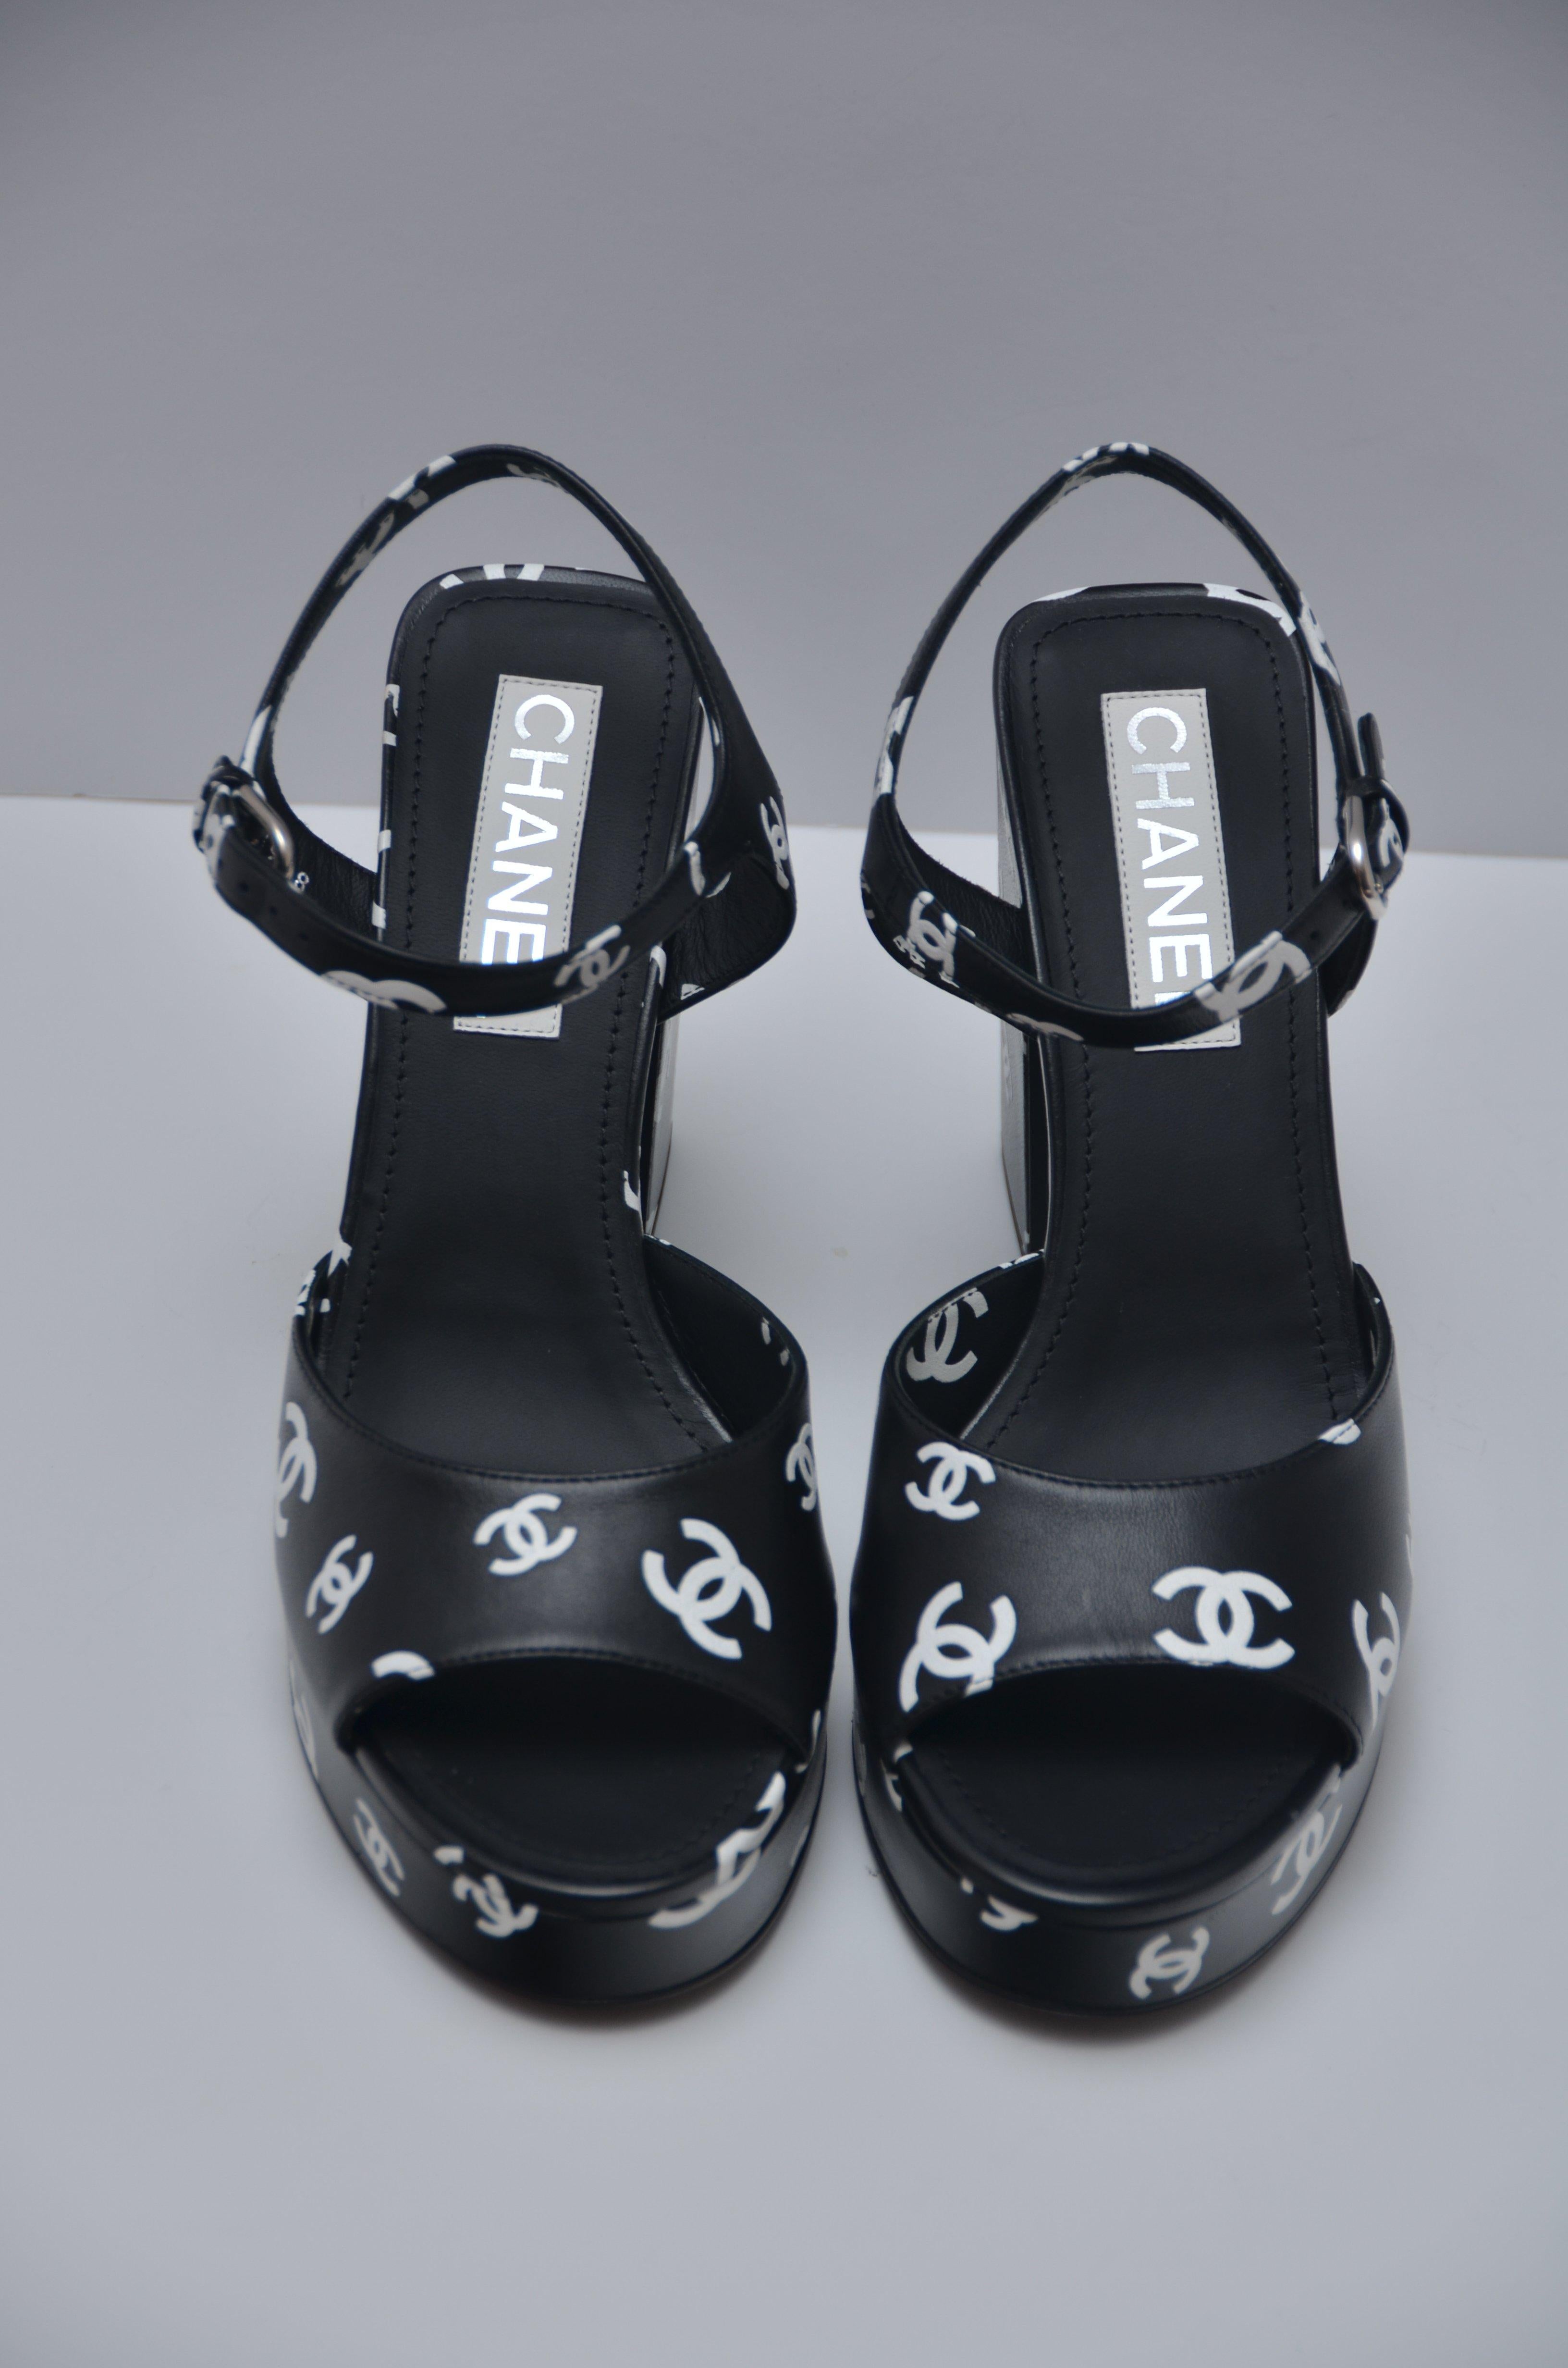 Chanel new platform shoes
Sold out in stores.
Size 40
Box and dust-bags included

FINAL SALE